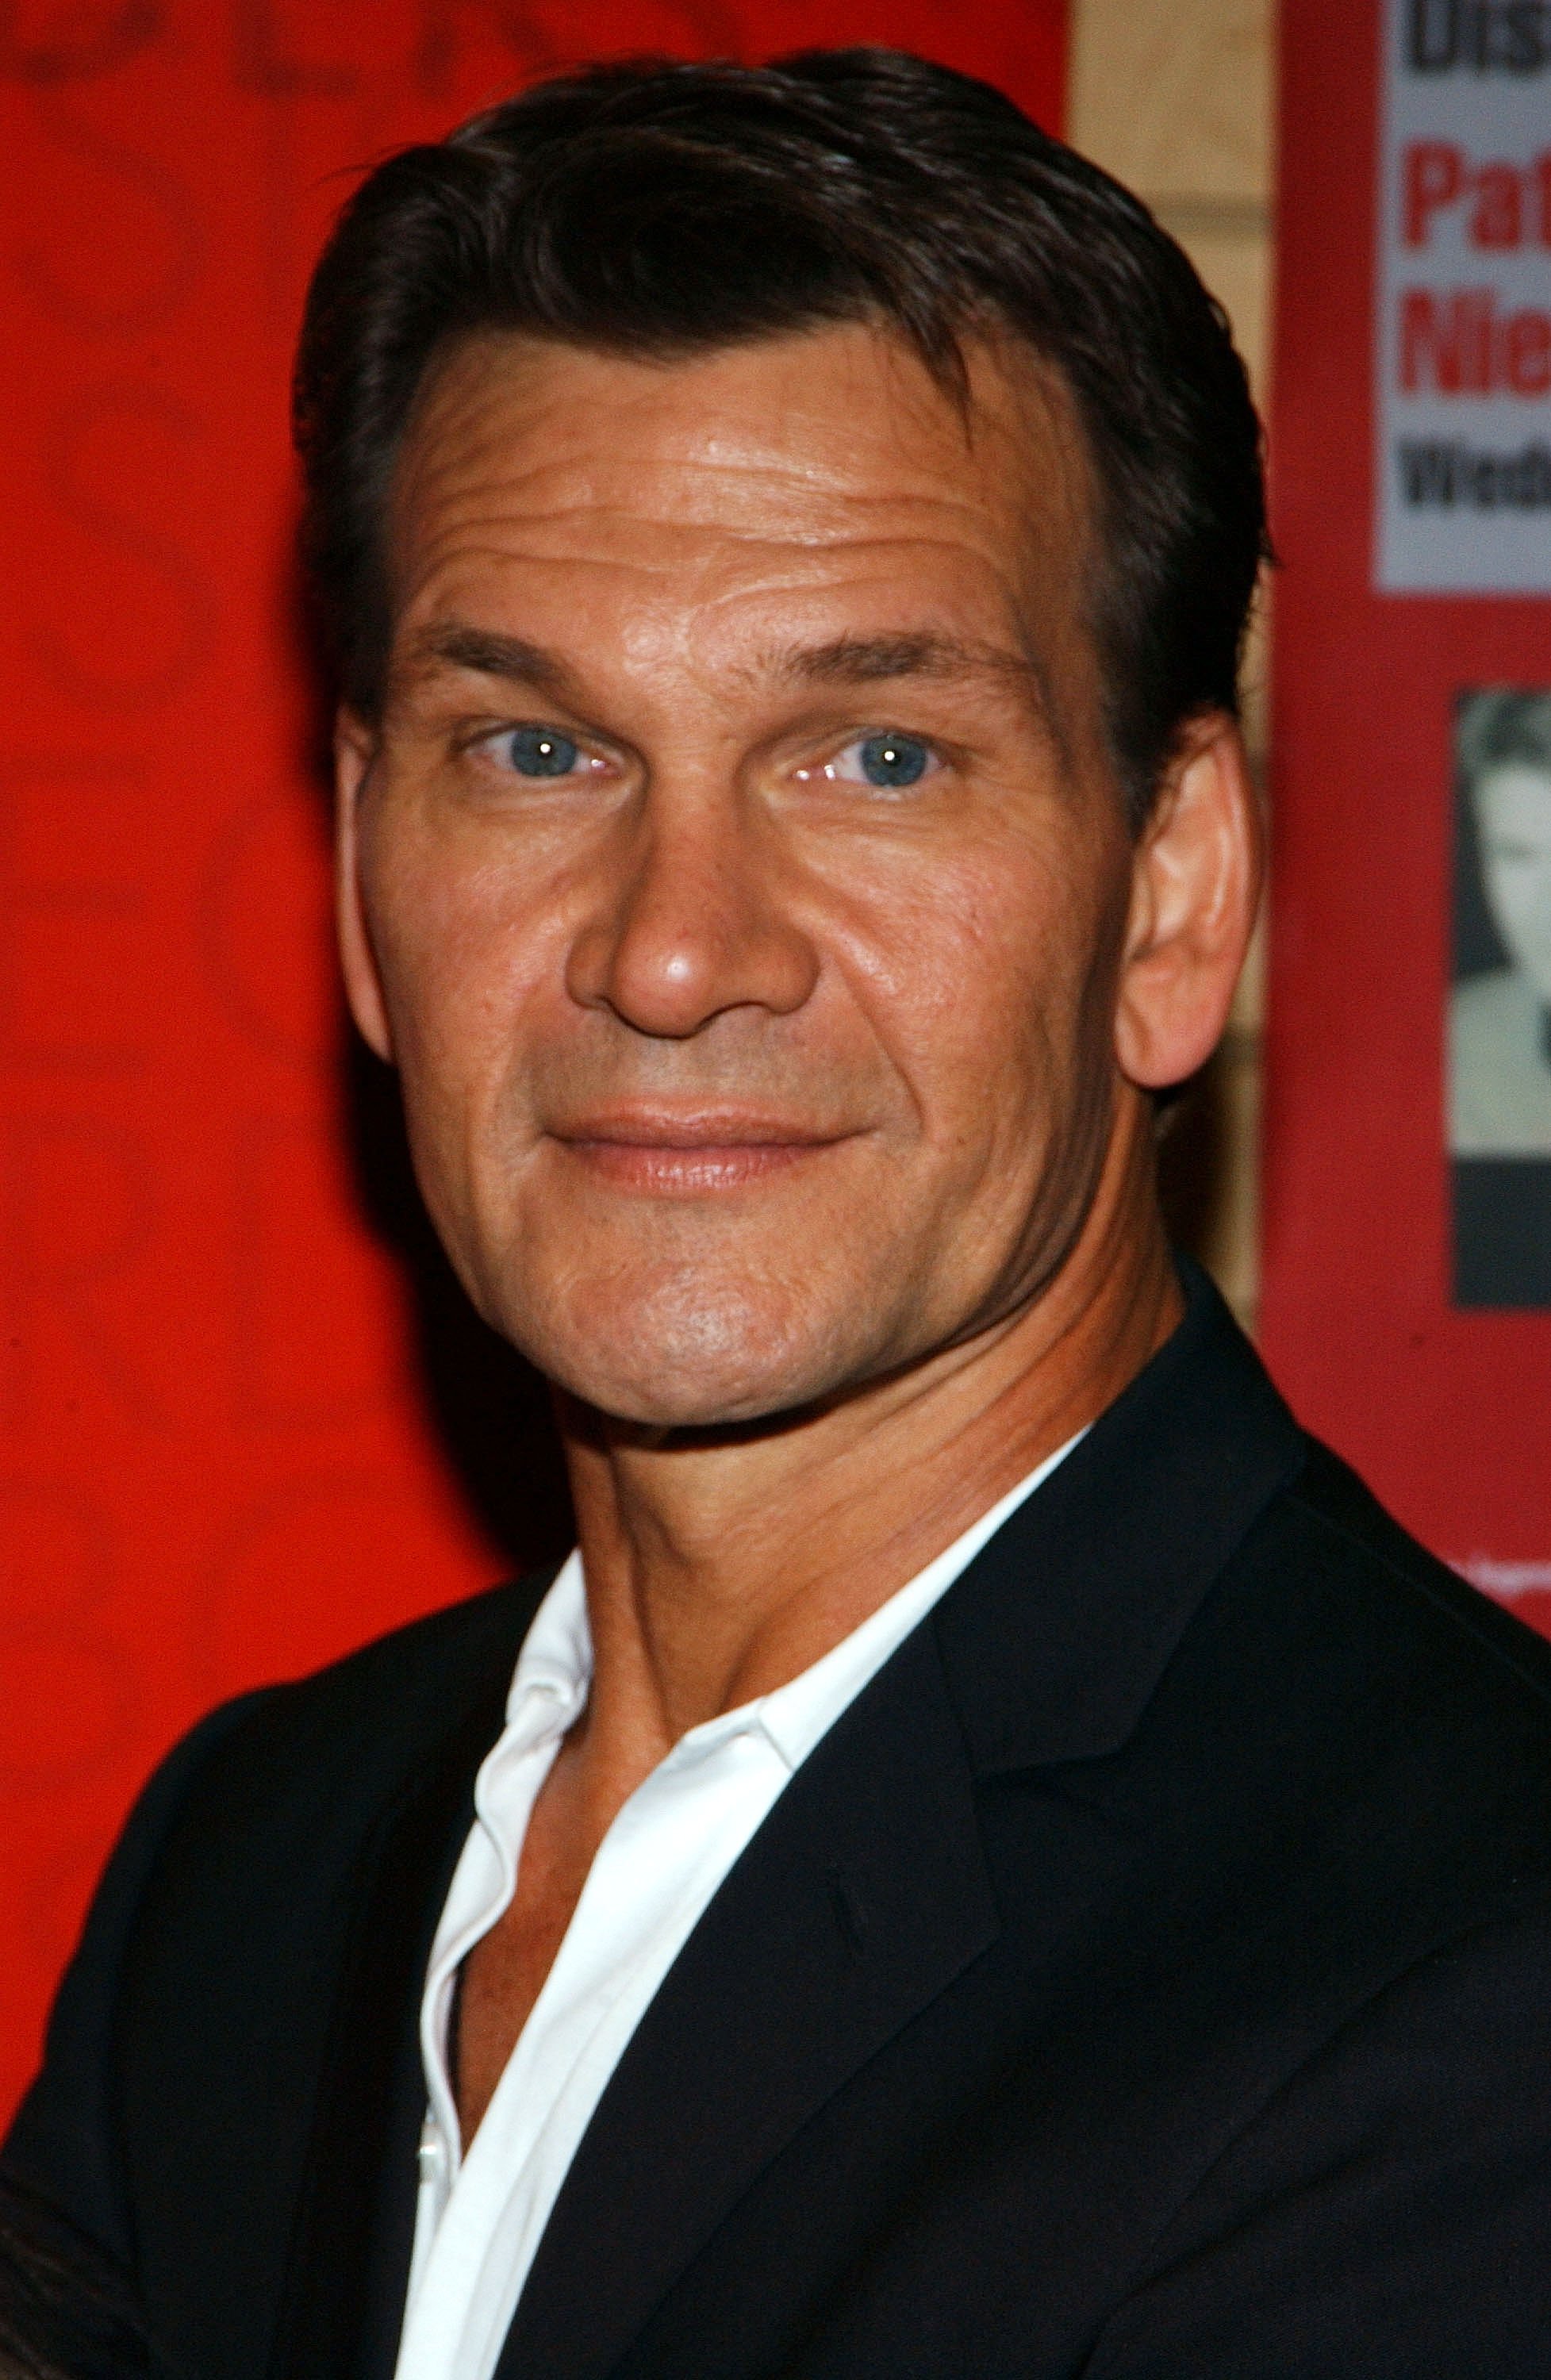 Actor Patrick Swayze appears at Borders Bookstore to sign copies of his new movie "One Last Dance" August 24, 2005 in New York City. | Photo: Getty Images